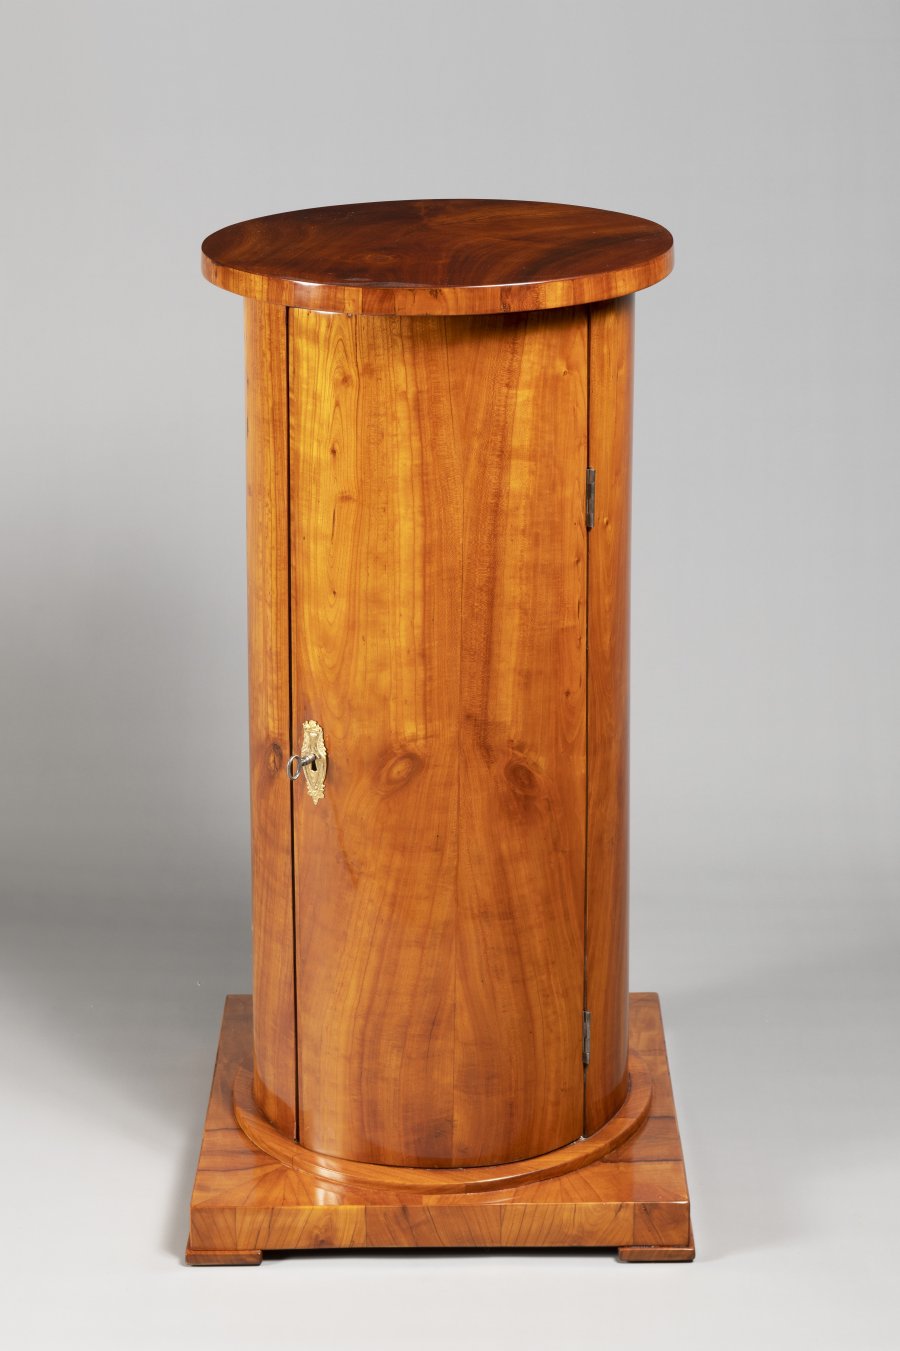 A “SOMNO” NIGHTSTAND FROM THE BIEDERMEIER PERIOD